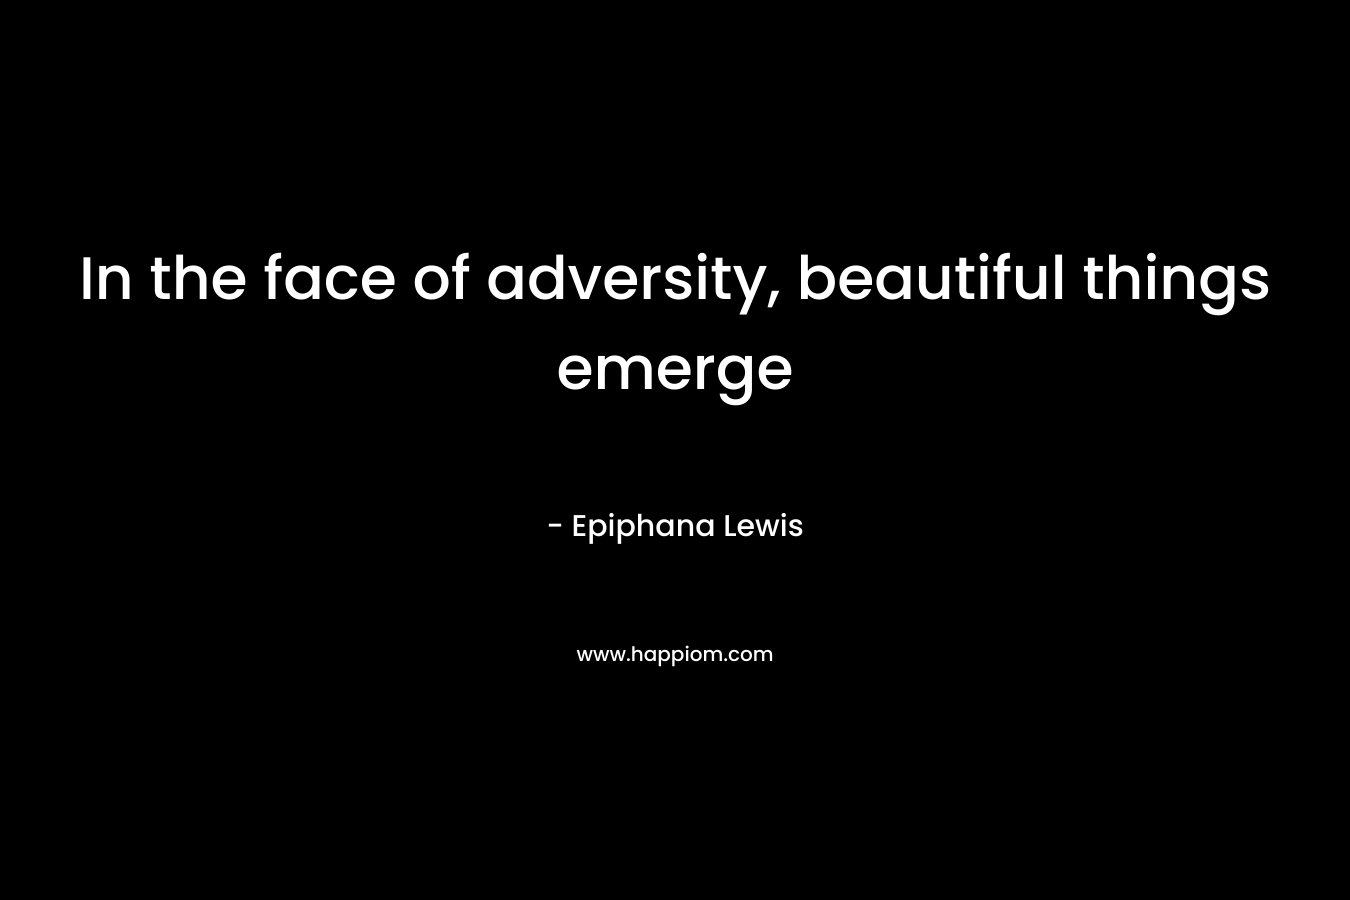 In the face of adversity, beautiful things emerge – Epiphana Lewis